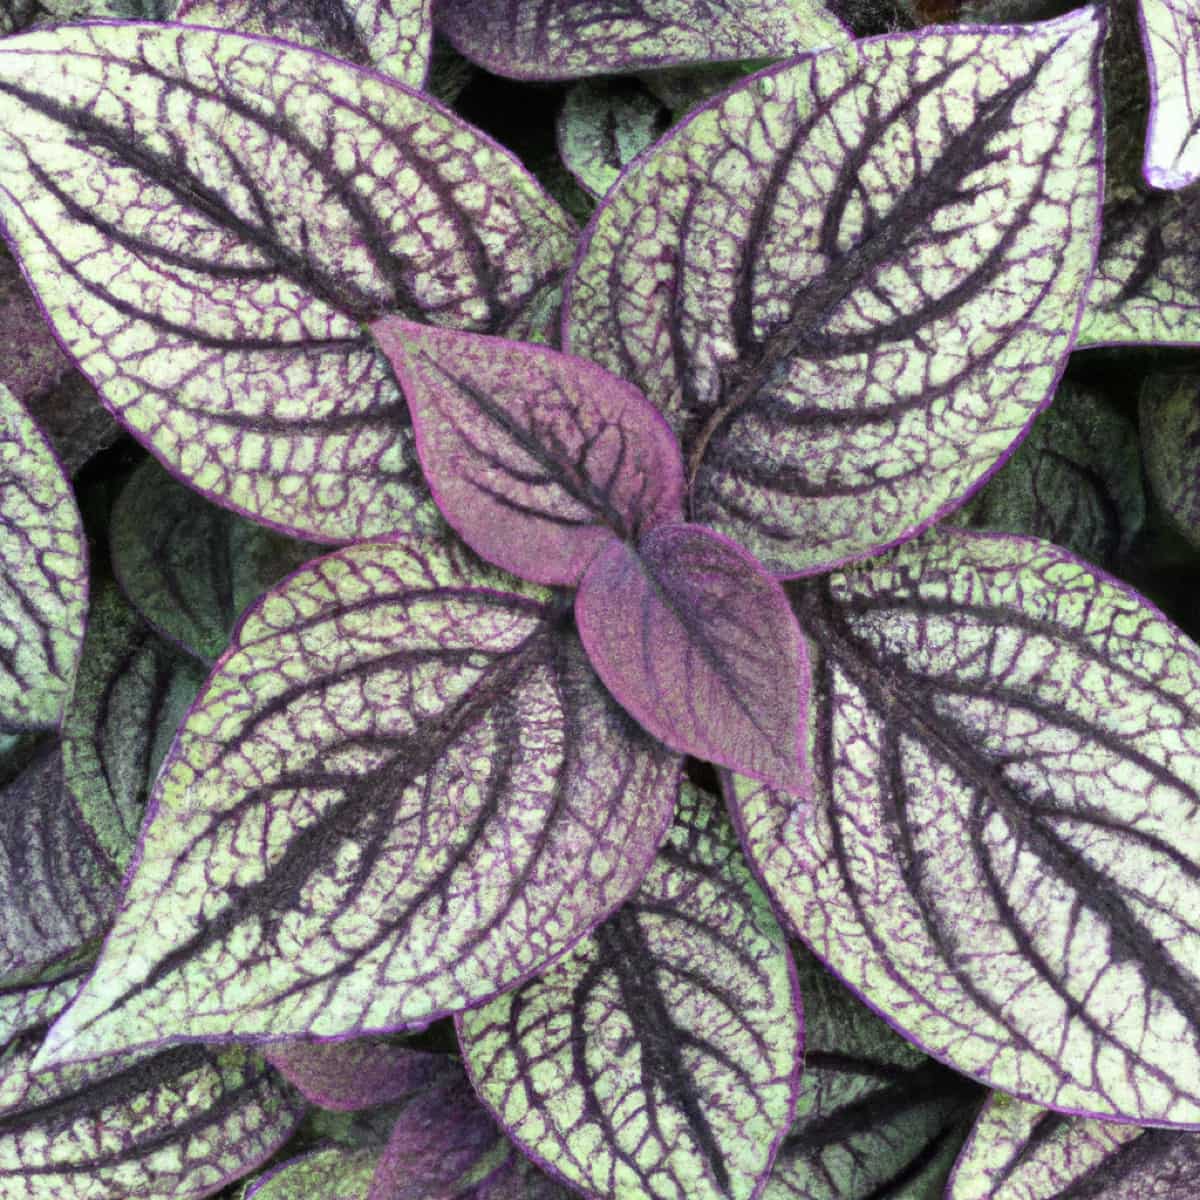 How to Grow and Care for Persian Shield